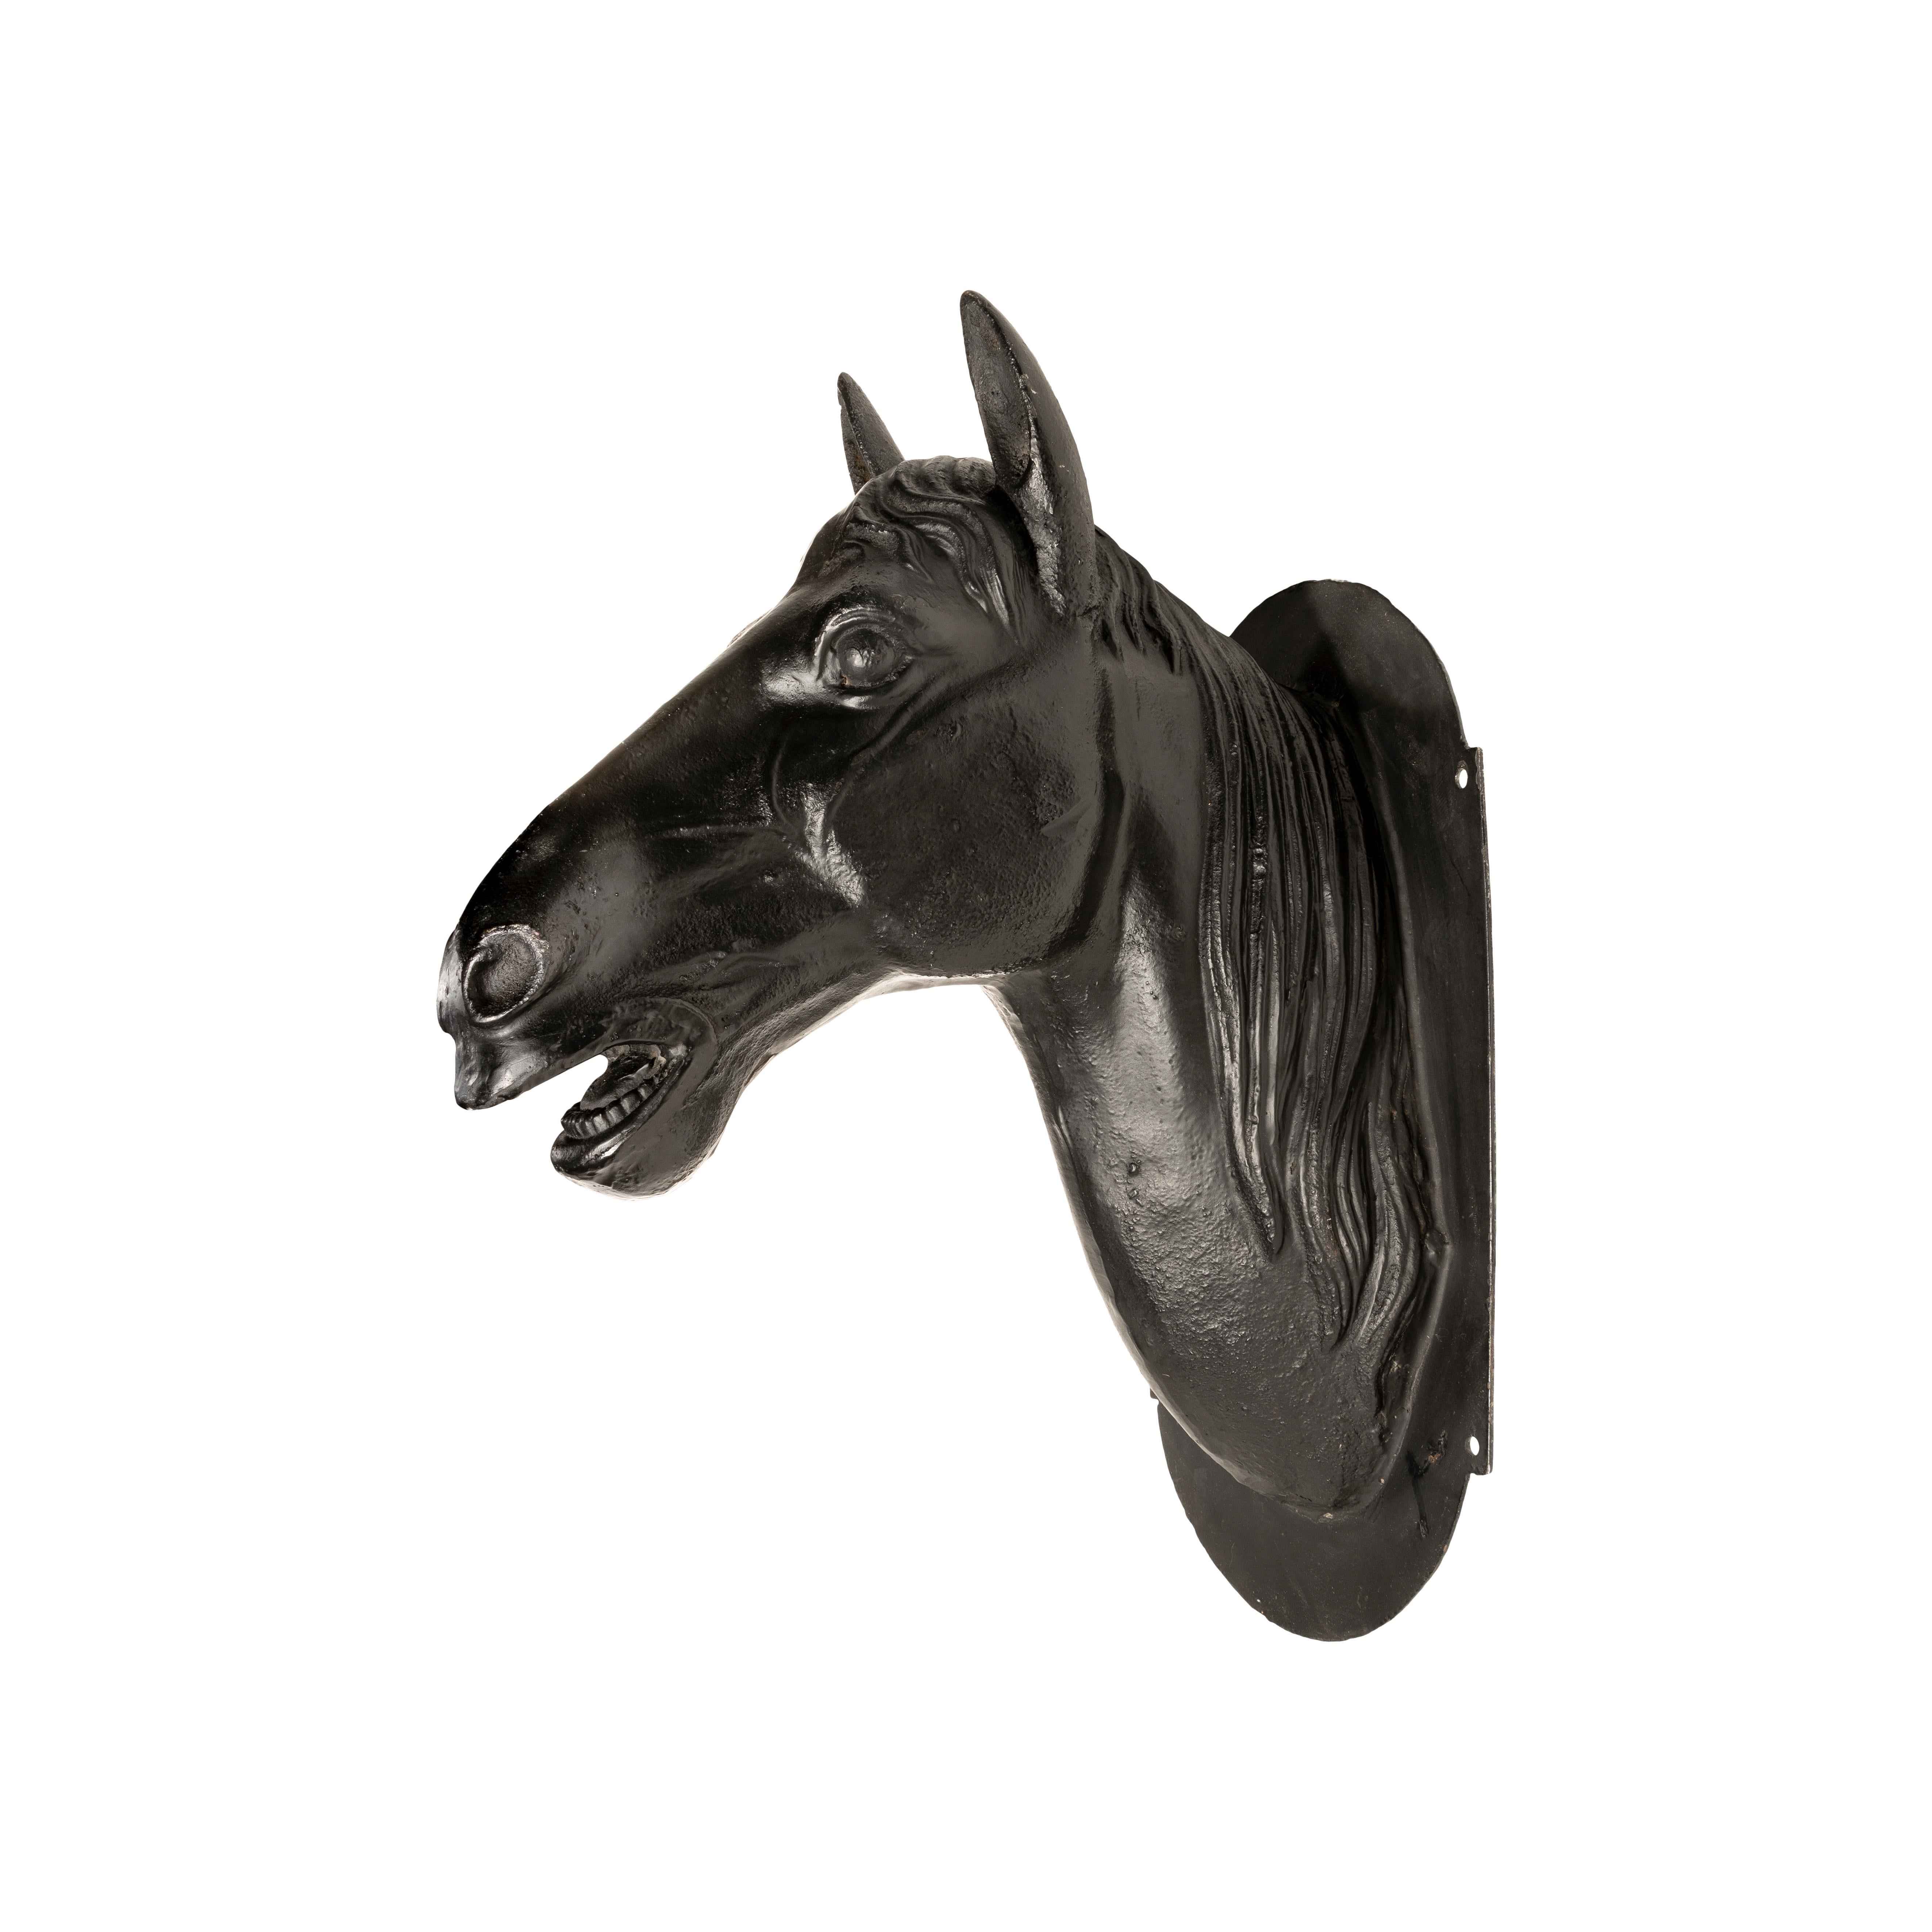 20th Century French Cast Iron Horse Head  For Sale